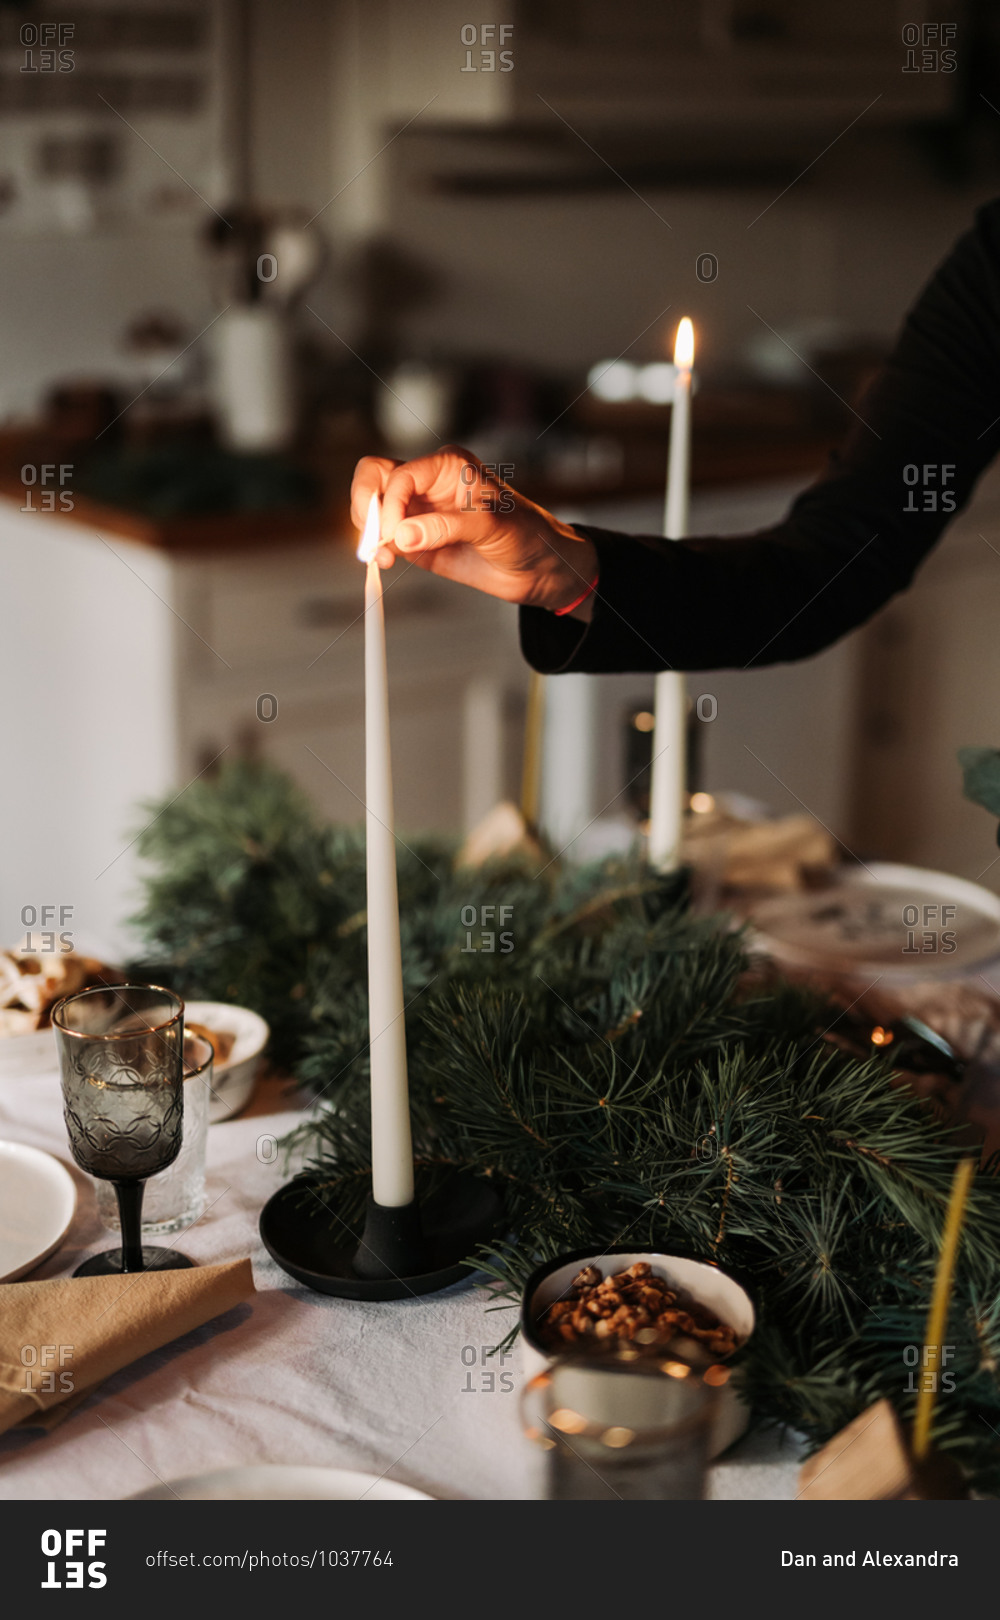 Woman lighting a candlestick on a holiday table set for a dinner party